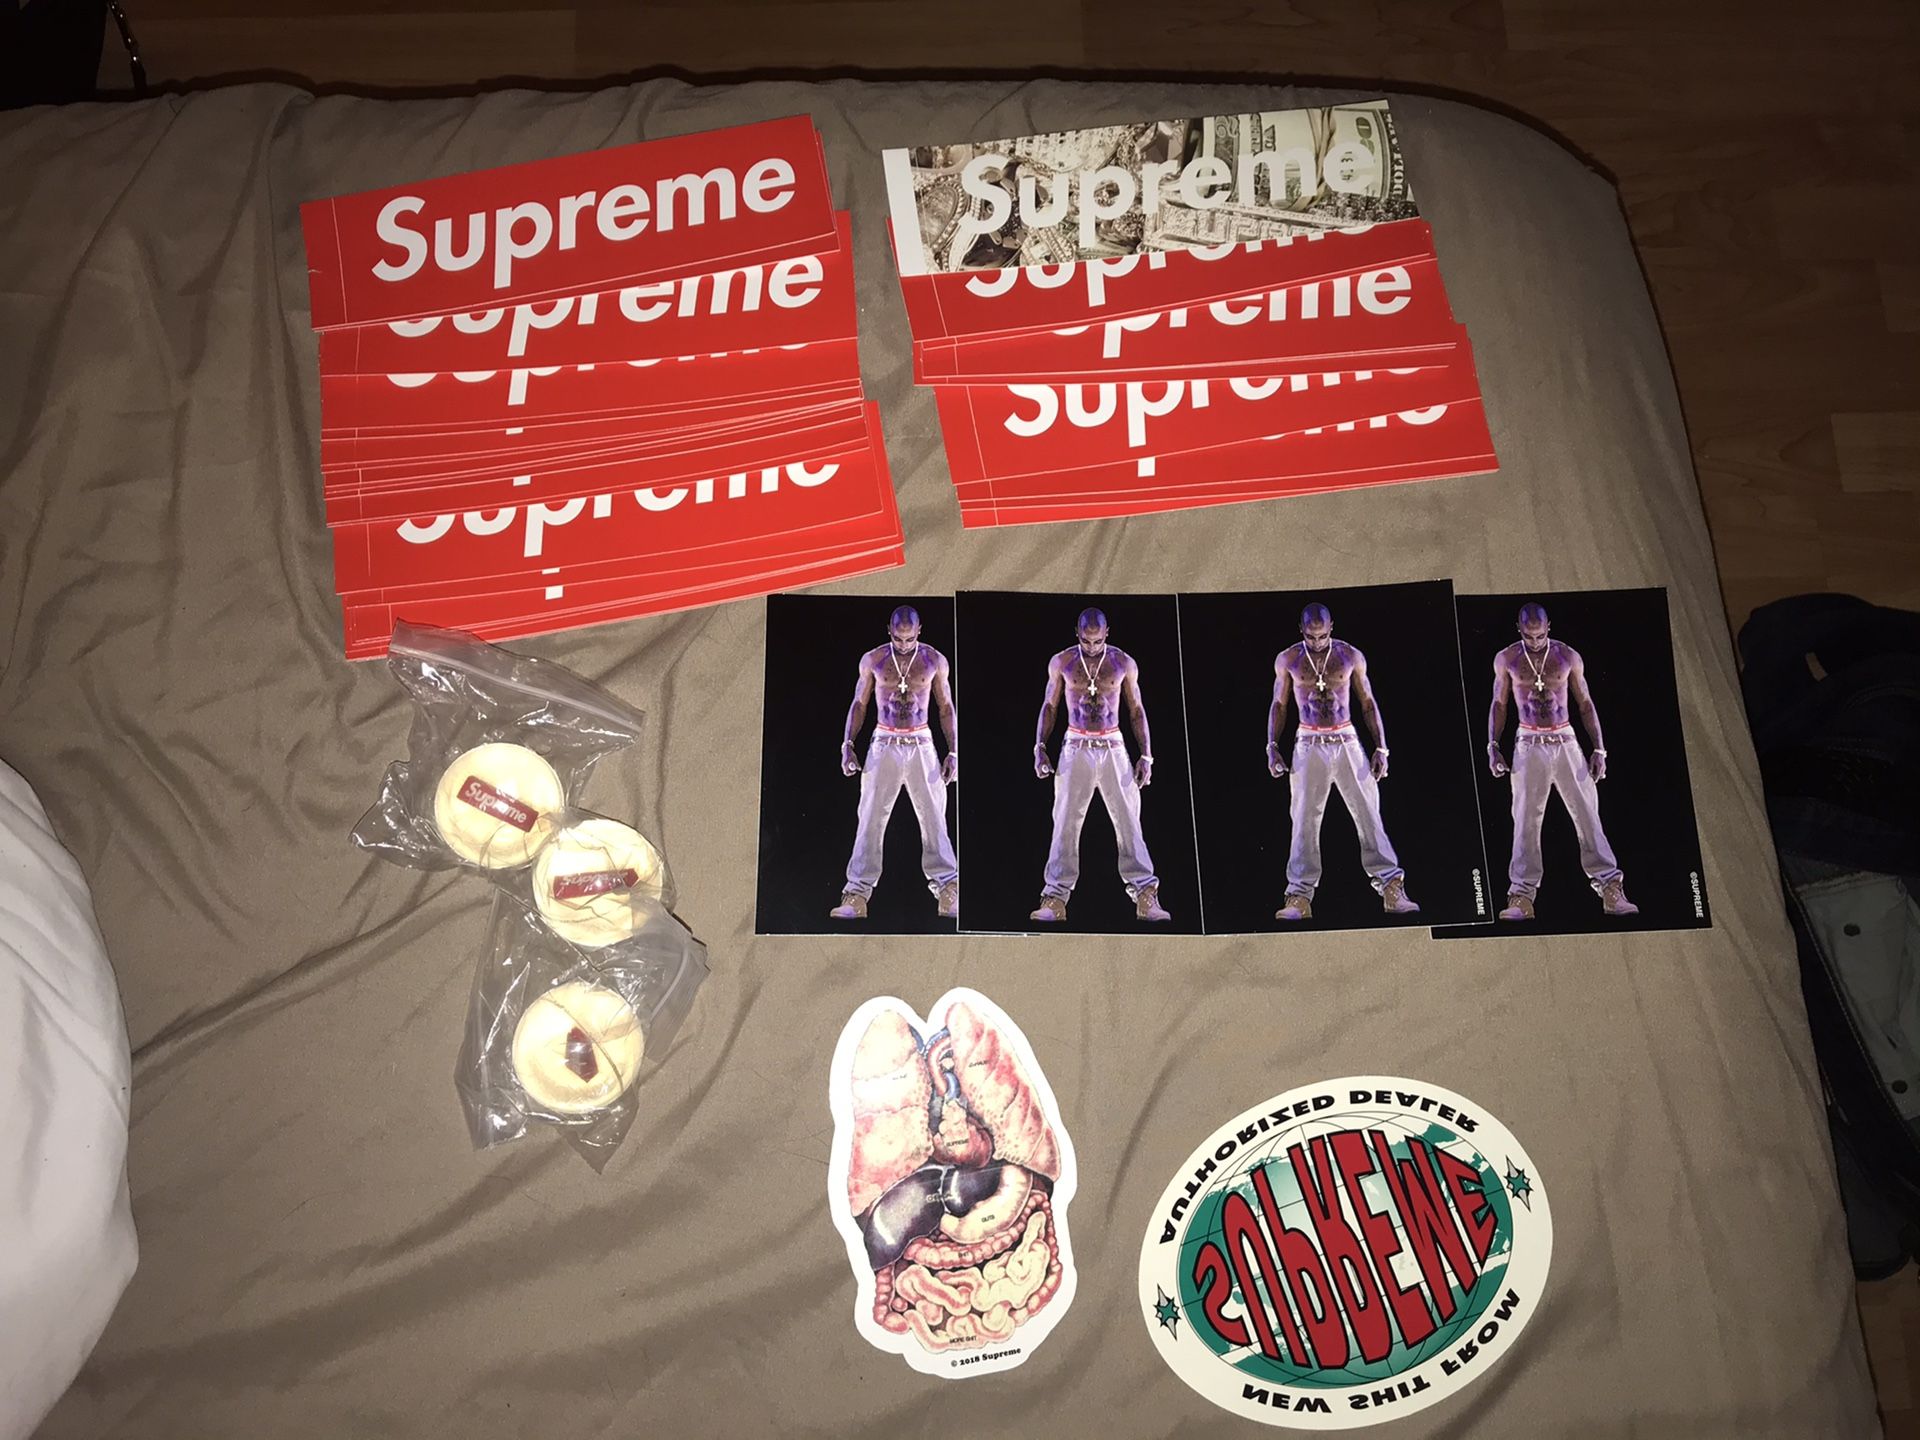 Supreme stickers and bouncy balls